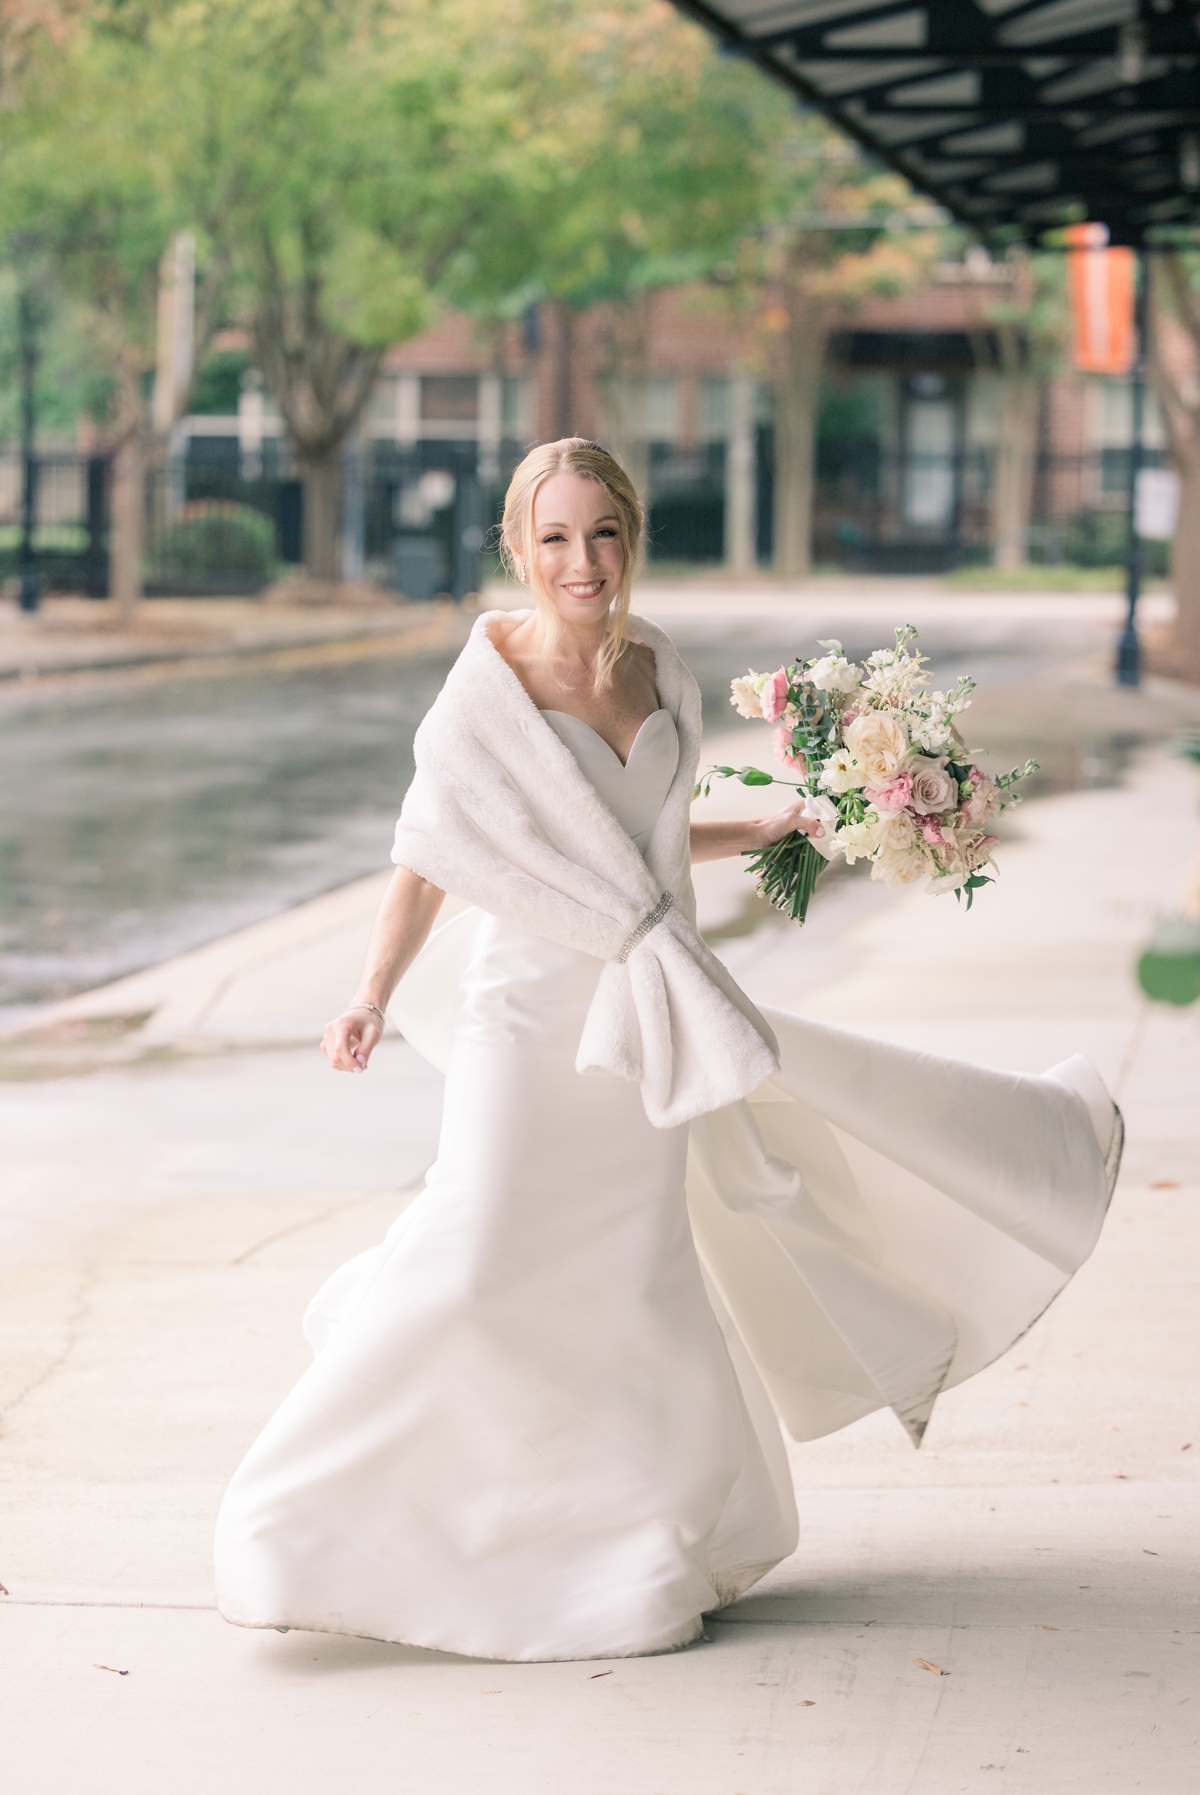 Rebecca spinning in her wedding gown outside Foundry Puritan Mill.